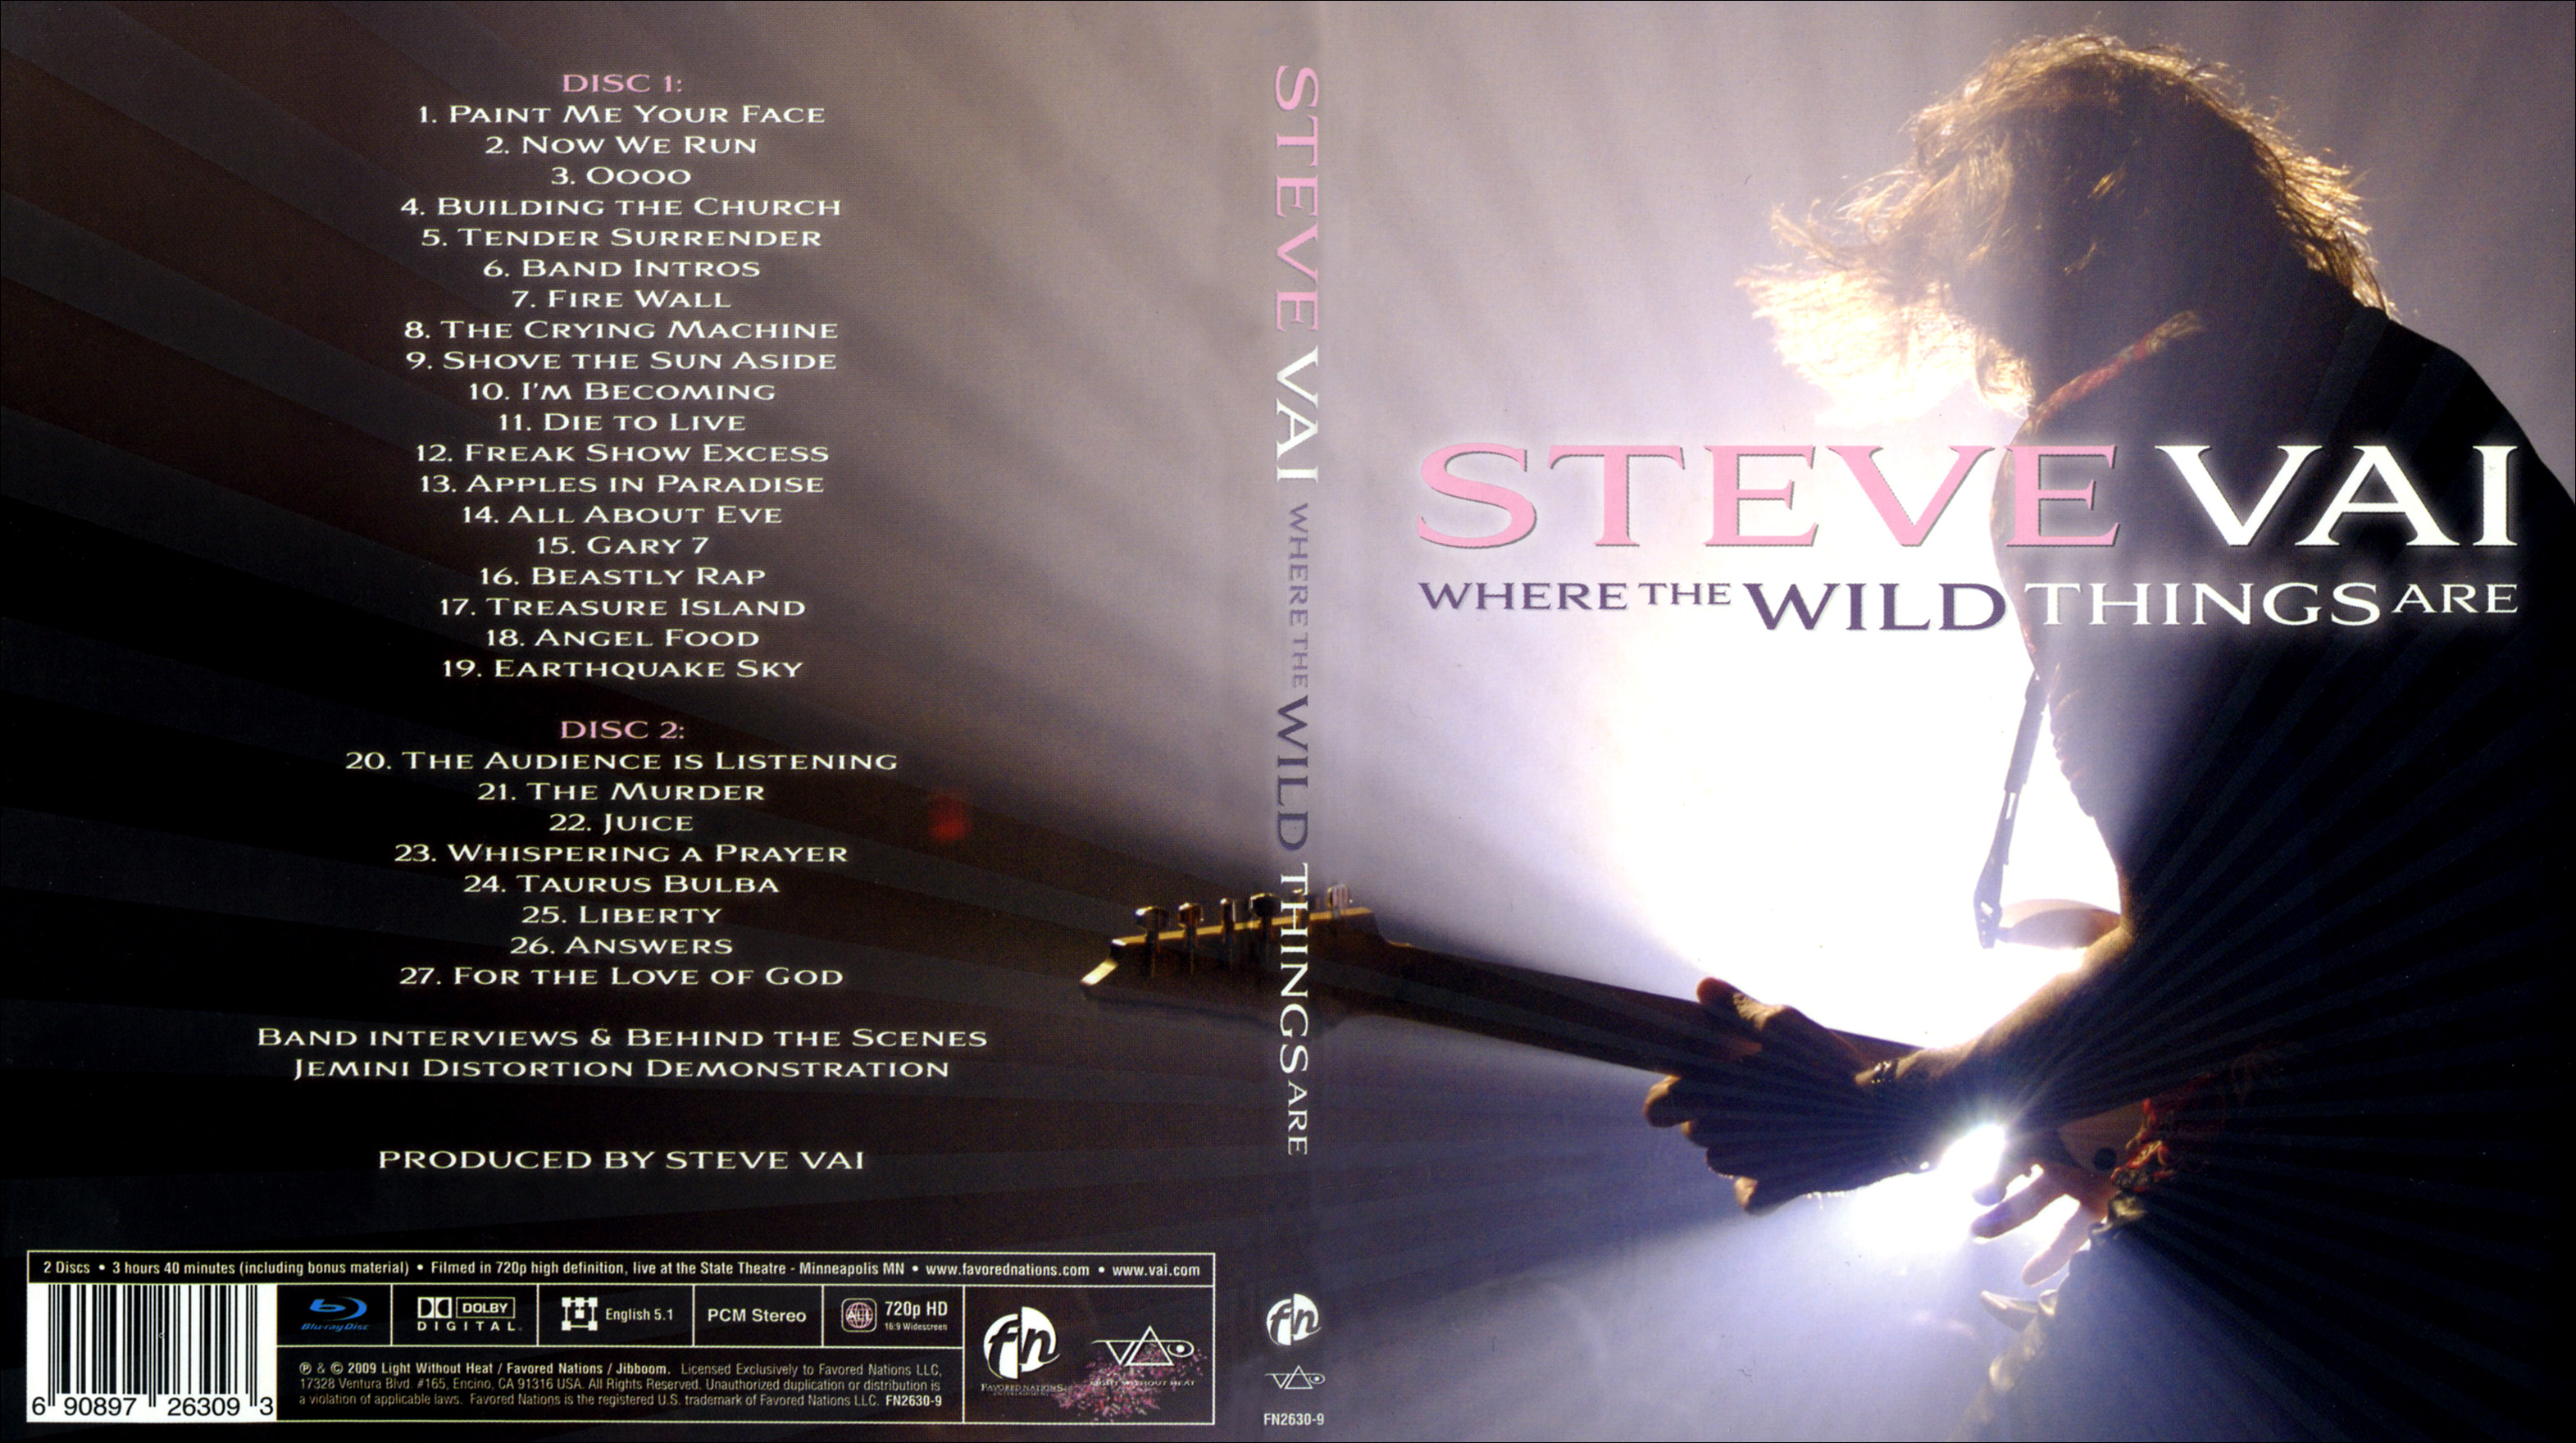 Jaquette DVD Steve Vai Where the wild things are (BLU-RAY)